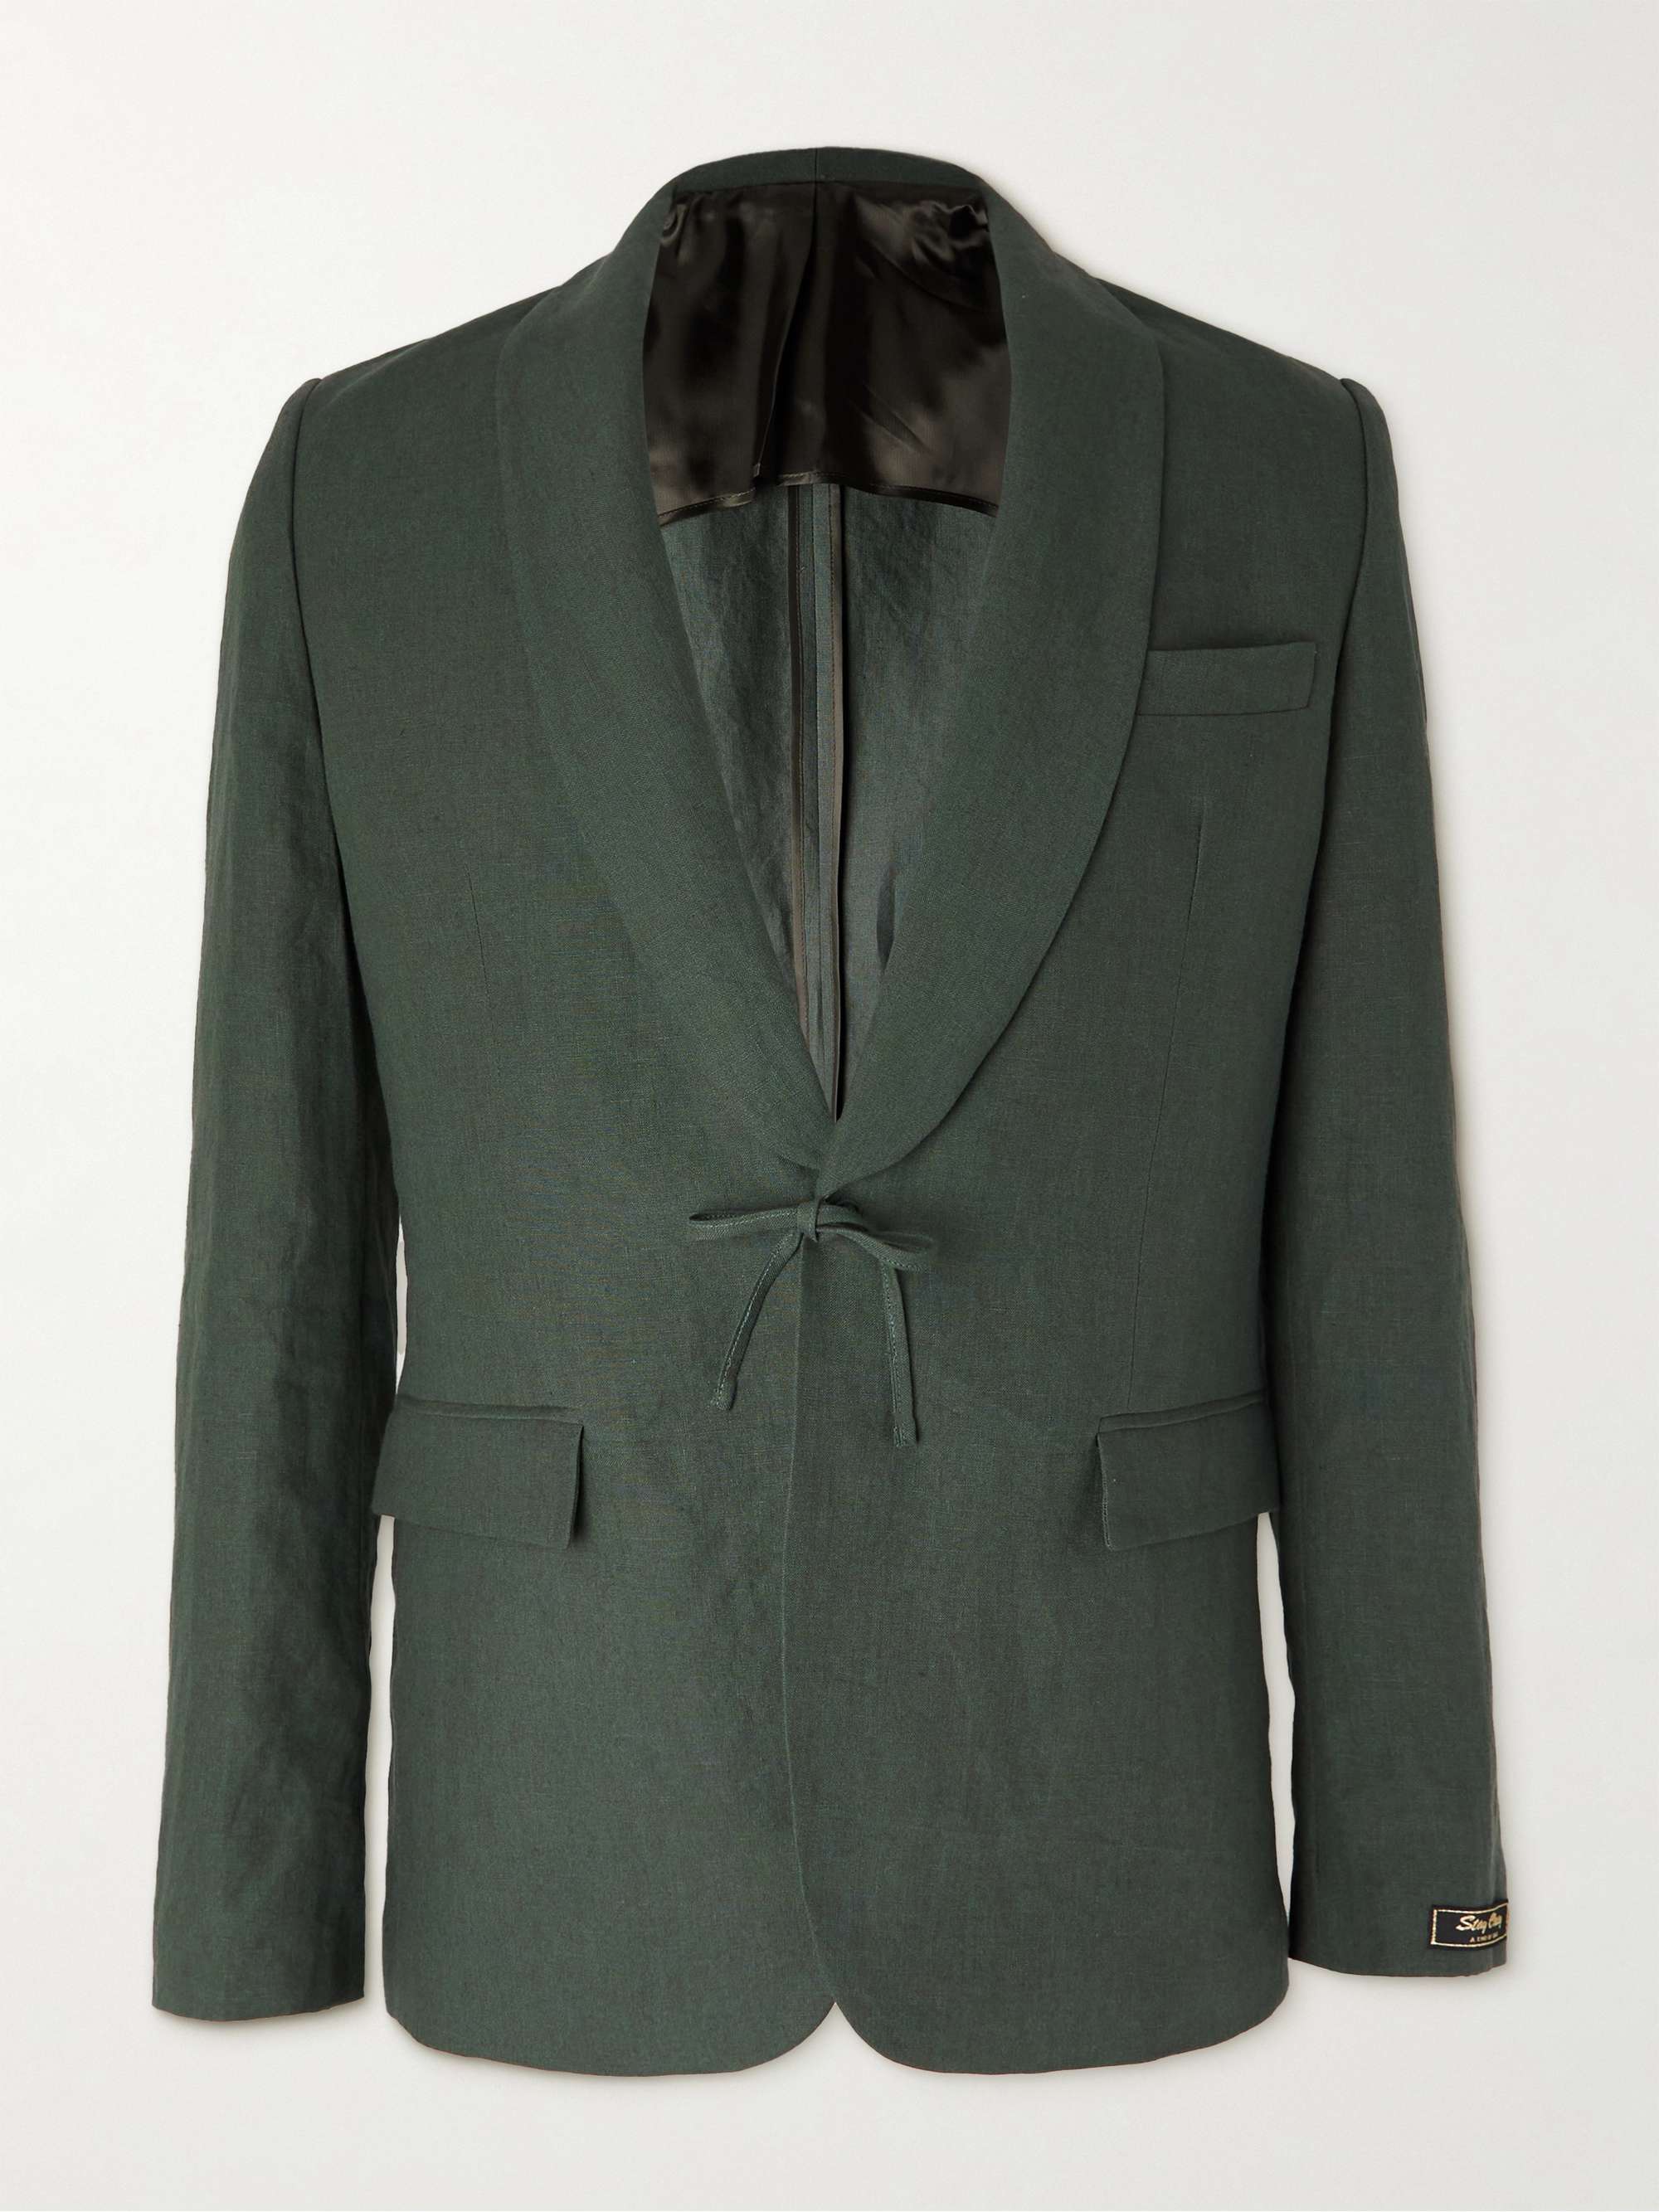 A KIND OF GUISE Shawl-Collar Linen Suit Jacket